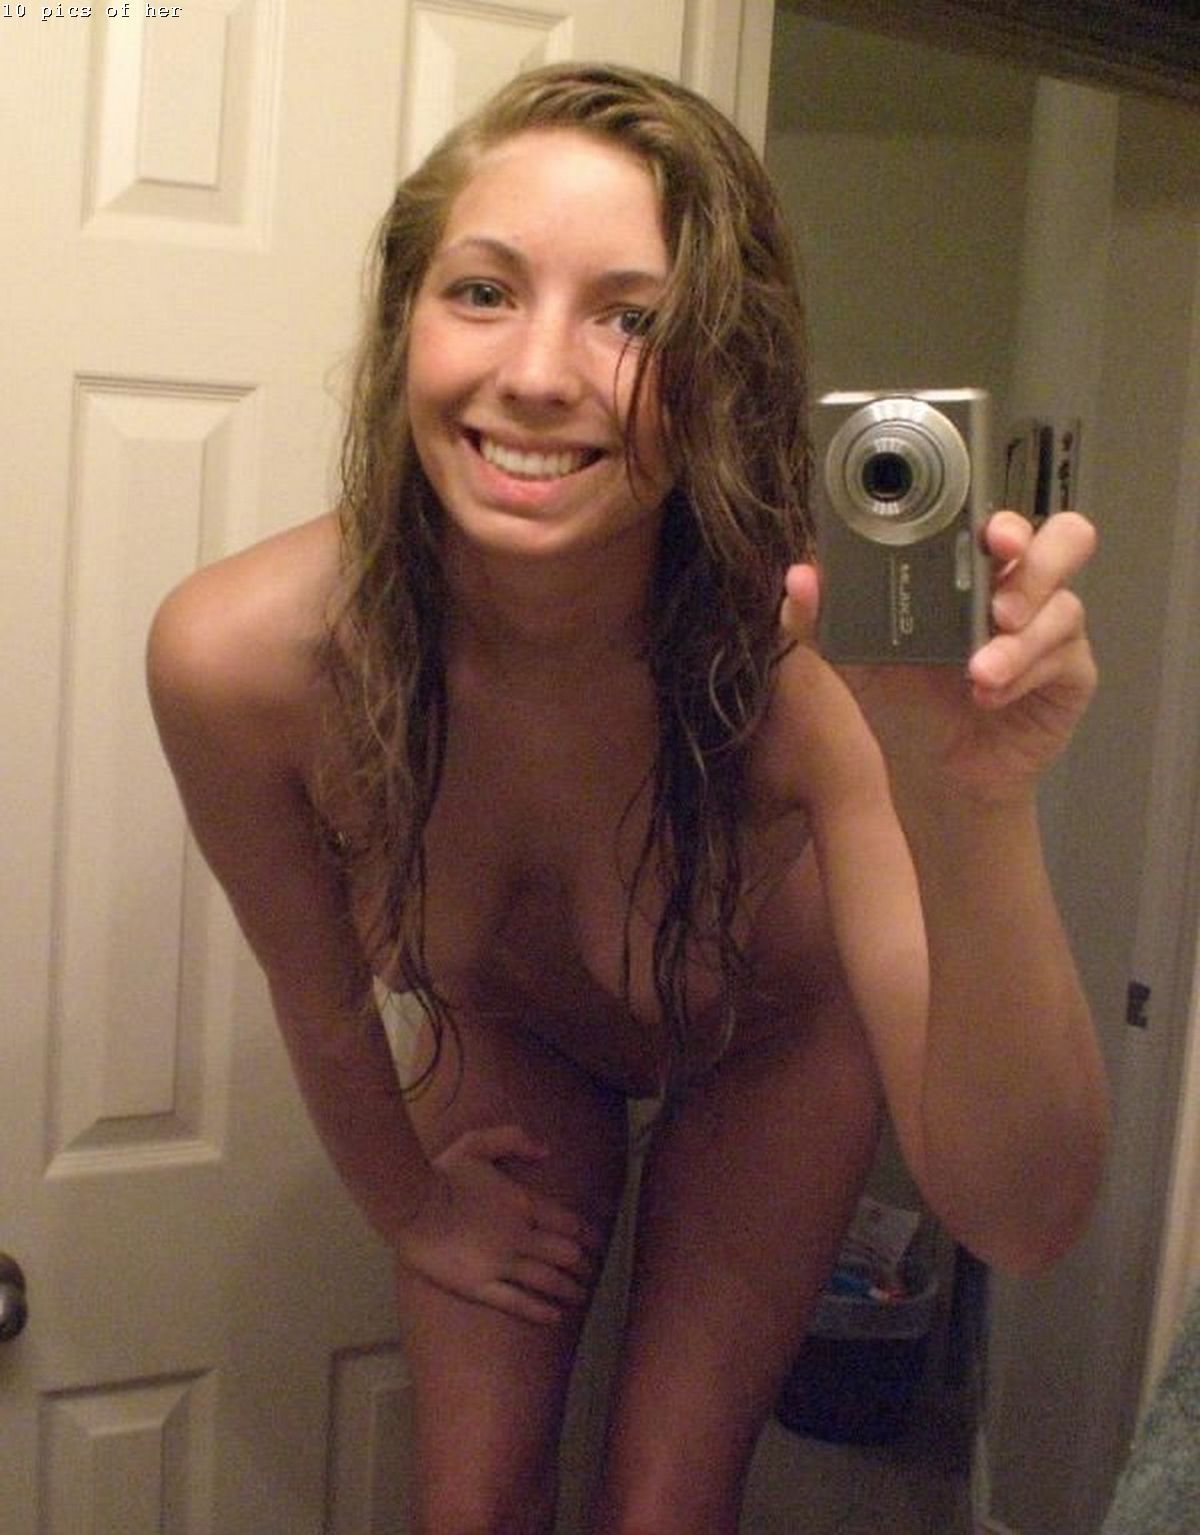 10picsofher:  More amateur sets here